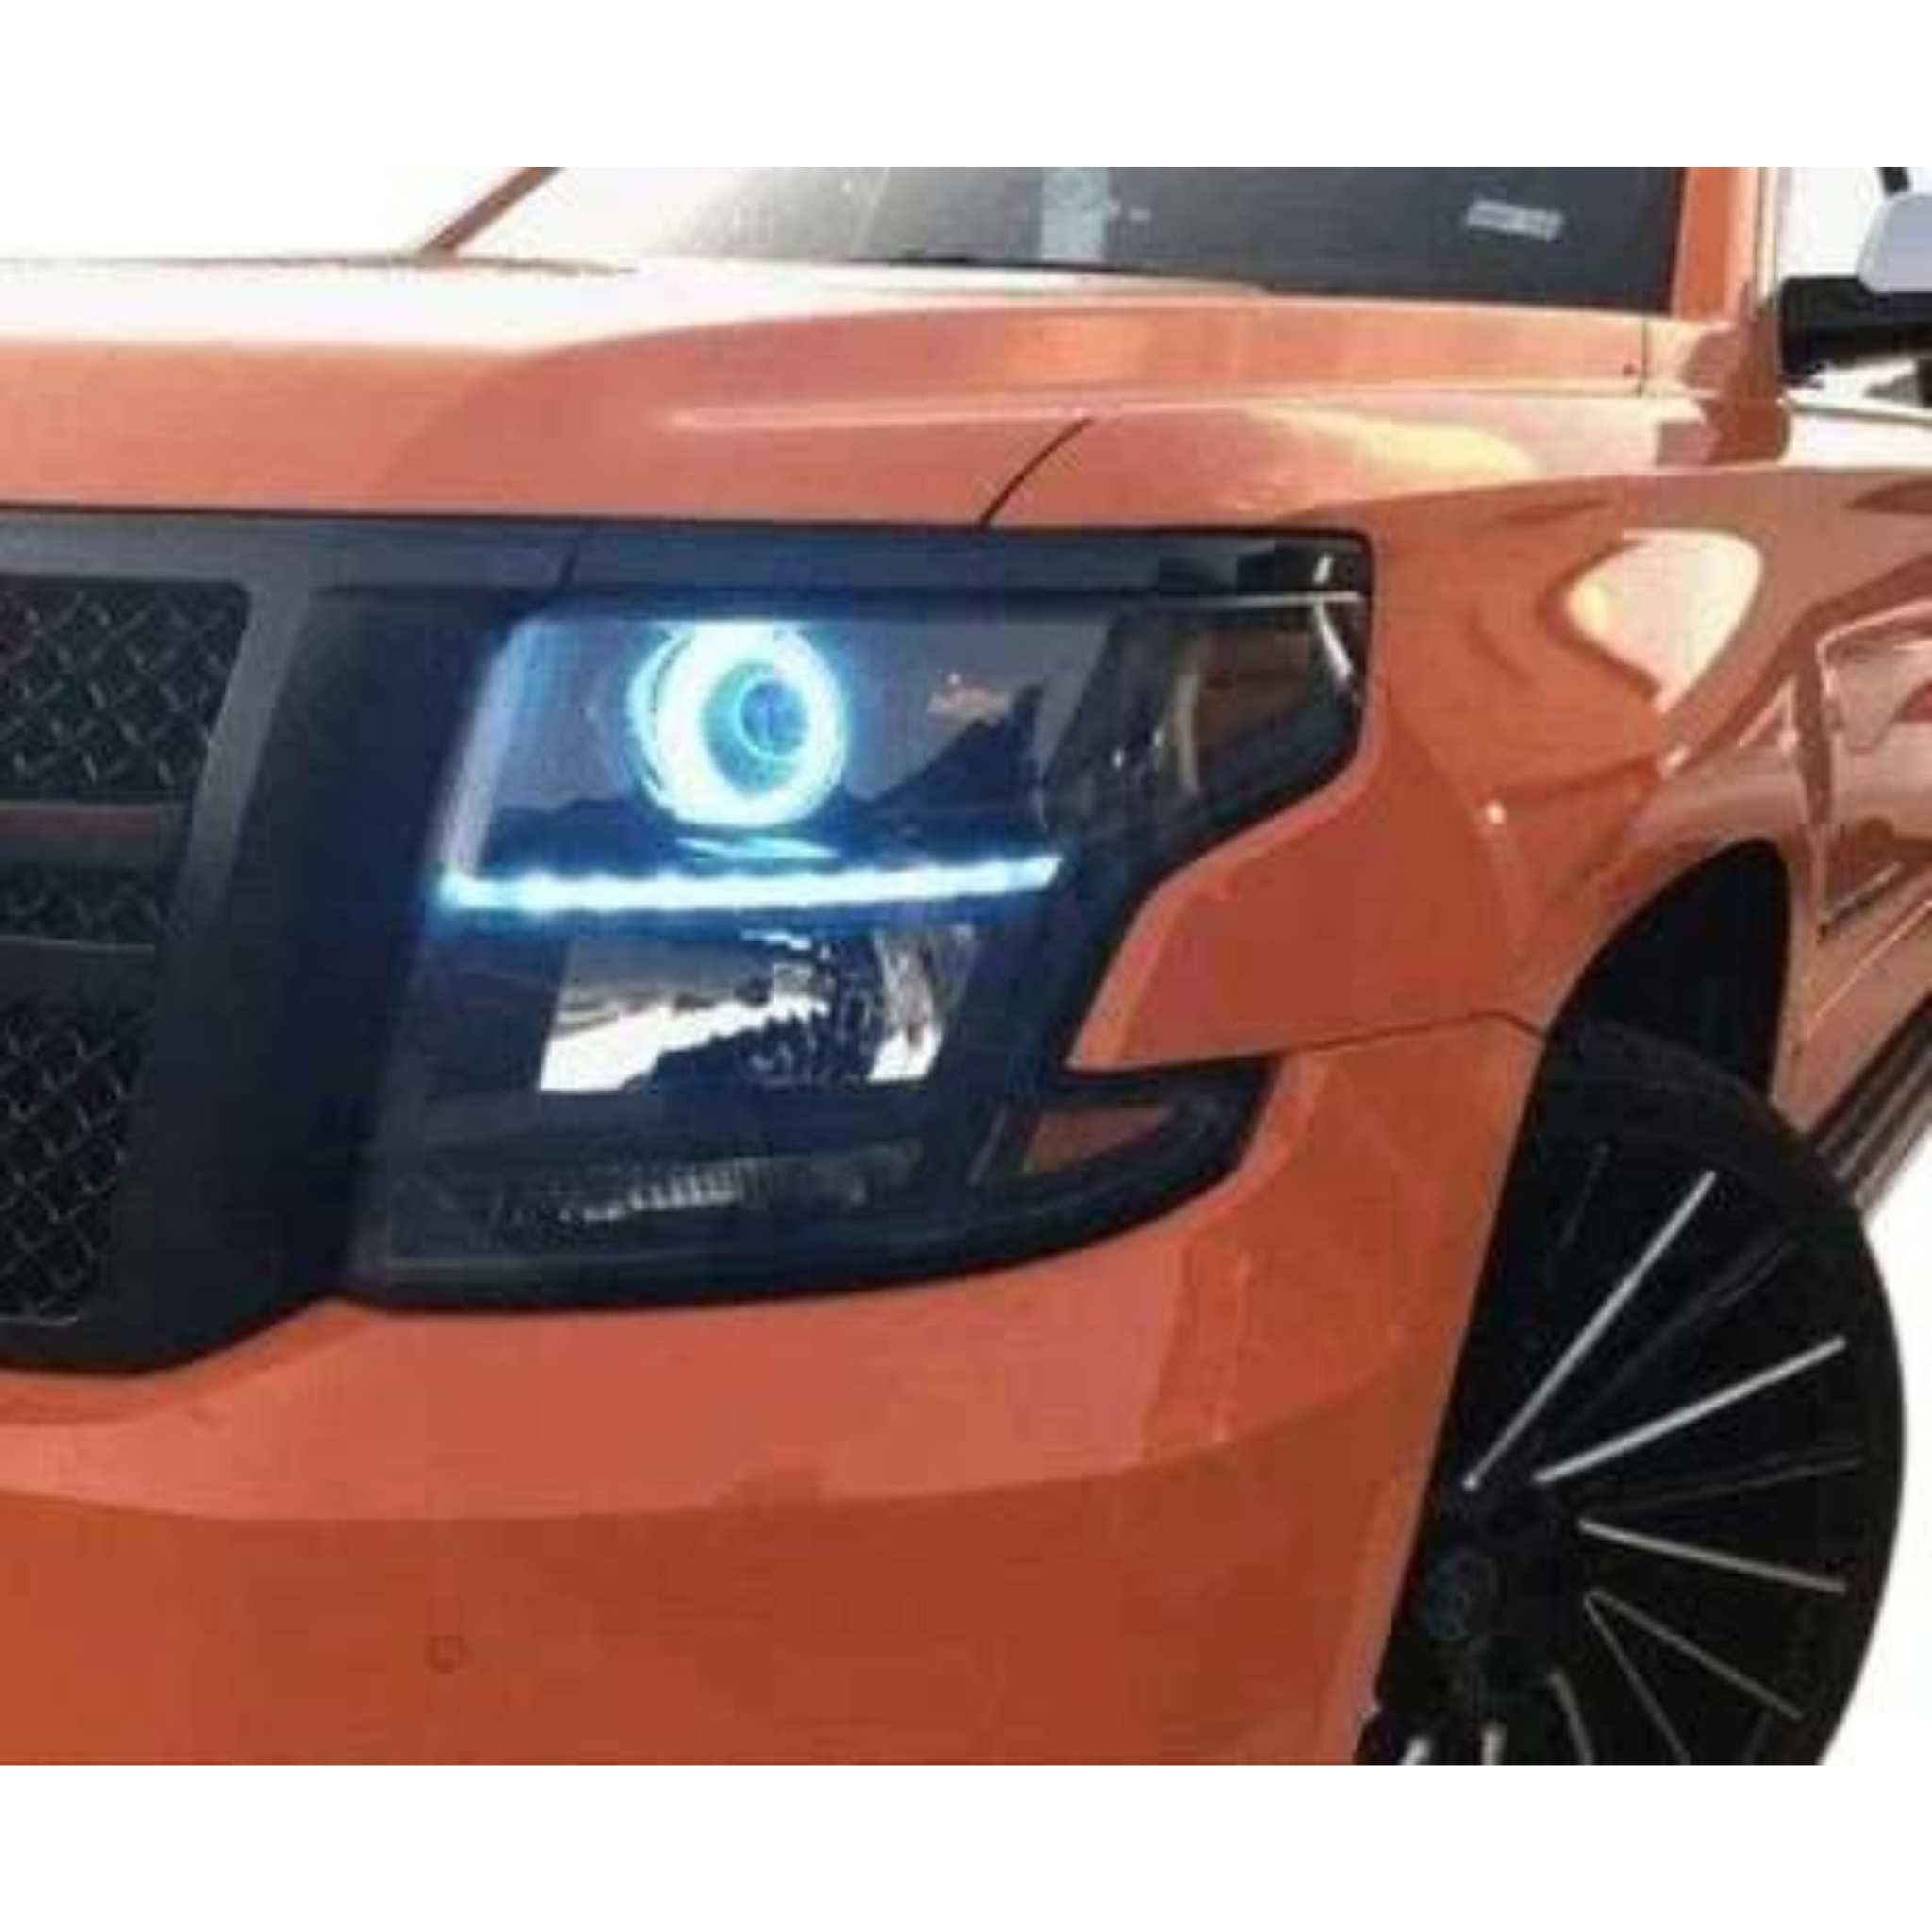 2015-2020 Chevrolet Suburban/Tahoe Flow Series/Color Chasing DRL Boards - RGB Halo Kits Multicolor Flow Series Color Chasing RGBWA LED headlight kit Oracle Lighting Trendz OneUpLighting Morimoto theretrofitsource AutoLEDTech Diode Dynamics